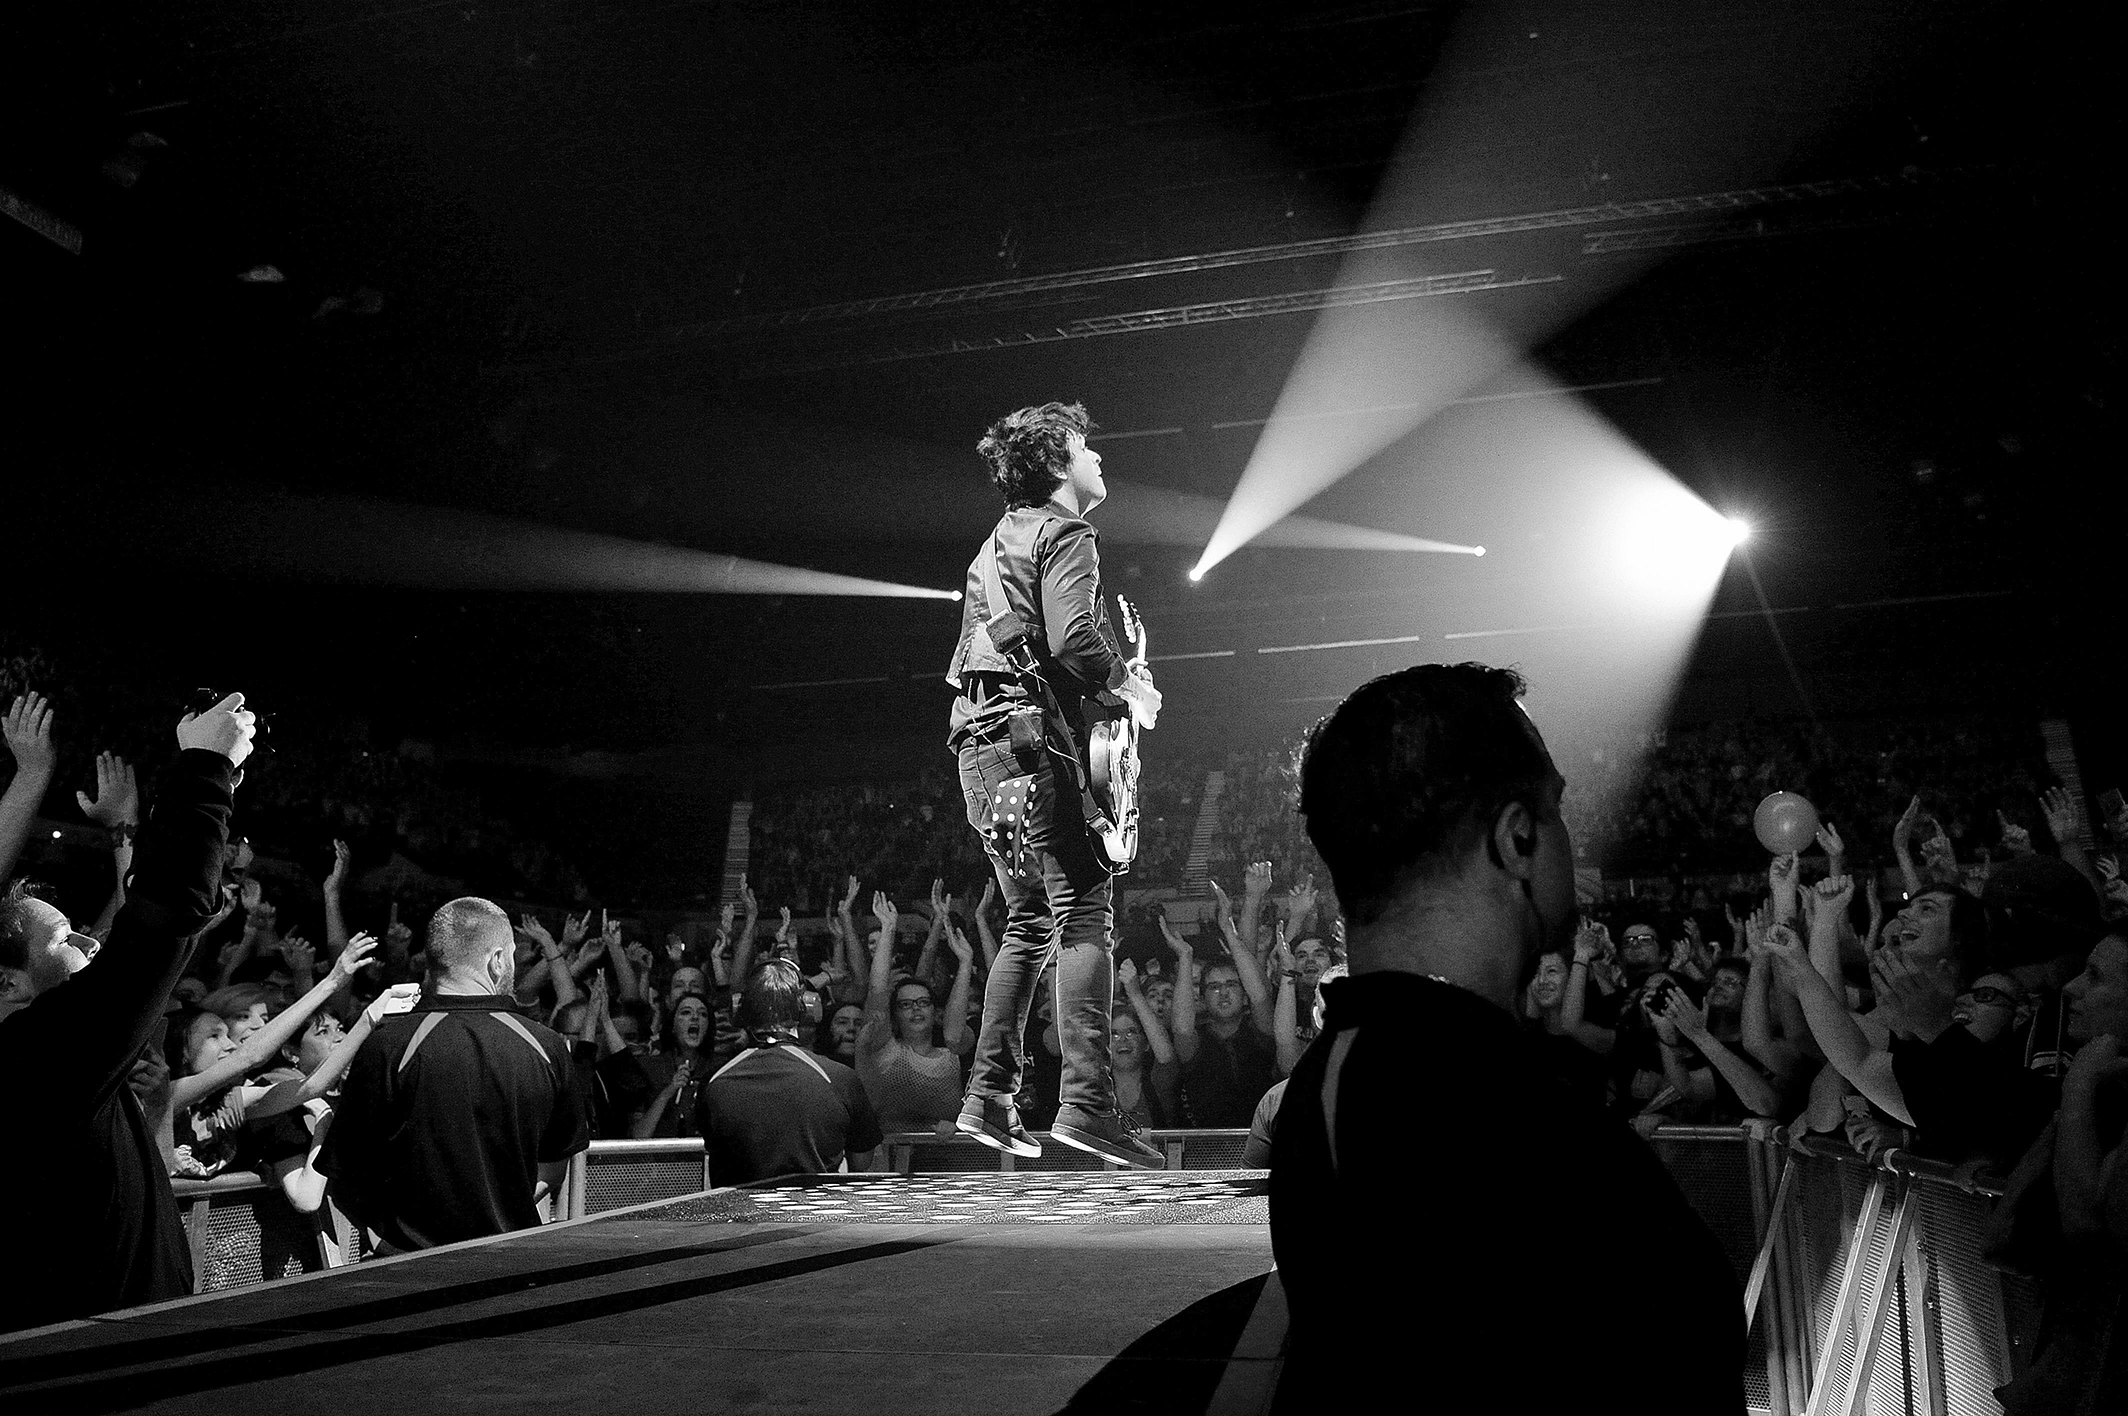 CHP_Export_156861285_American punk rockers Green Day play their Revolution Radio tour at he Adelaide.jpg